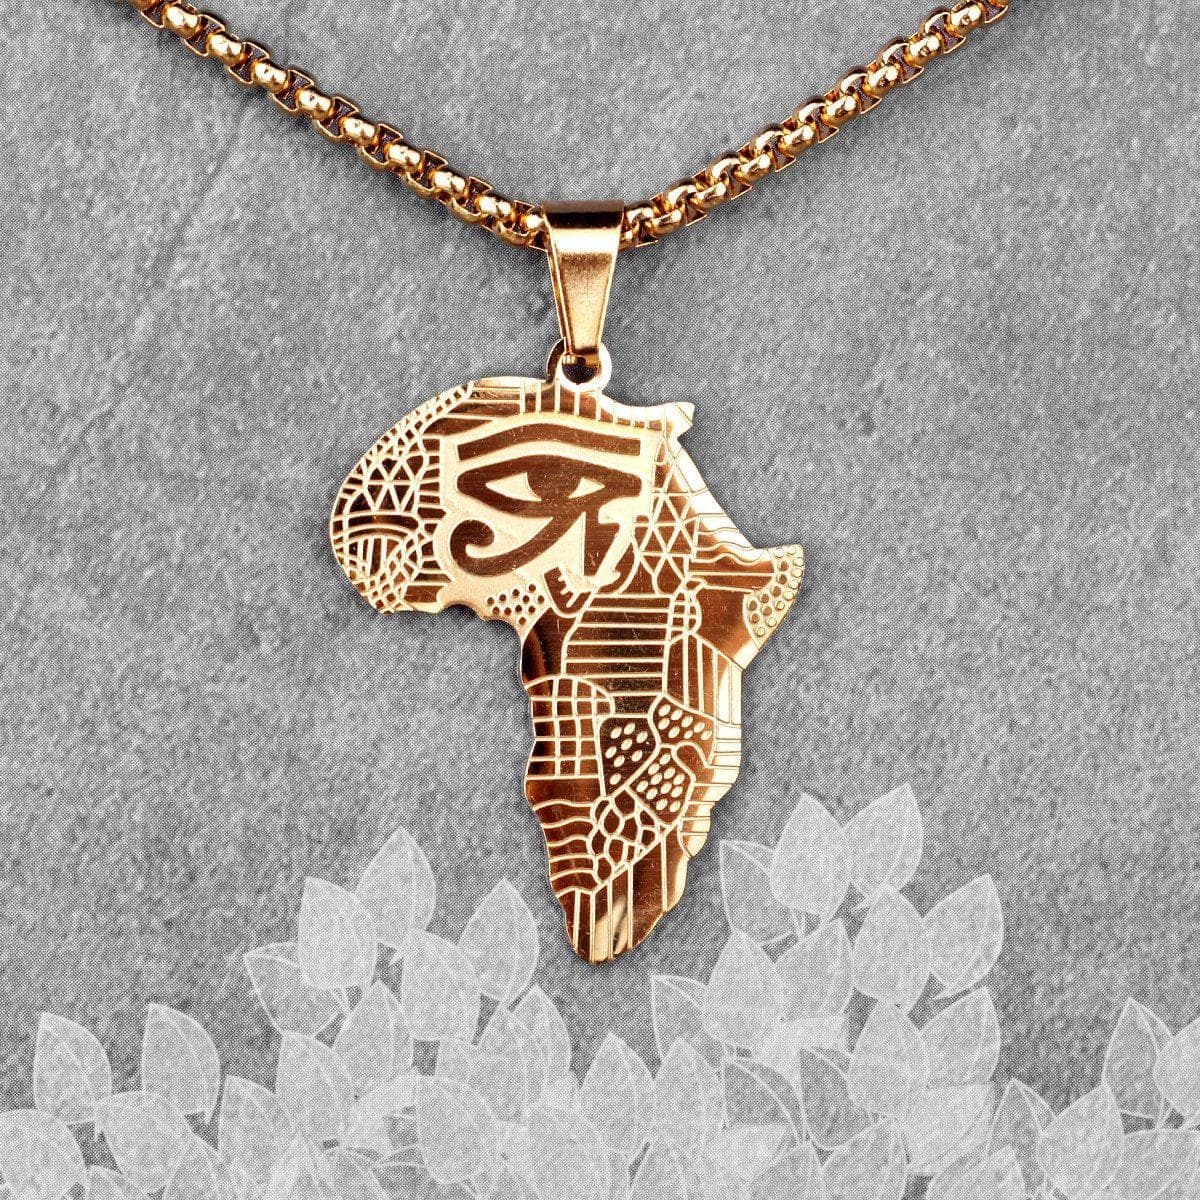 Pendant Necklaces Africa Map Gold Long Men Necklaces Pendants Chain Punk for Boyfriend Male Stainless Steel Jewelry Creativity Gift Wholesale|Pendant Necklaces| Ancient Treasures Ancientreasures Viking Odin Thor Mjolnir Celtic Ancient Egypt Norse Norse Mythology